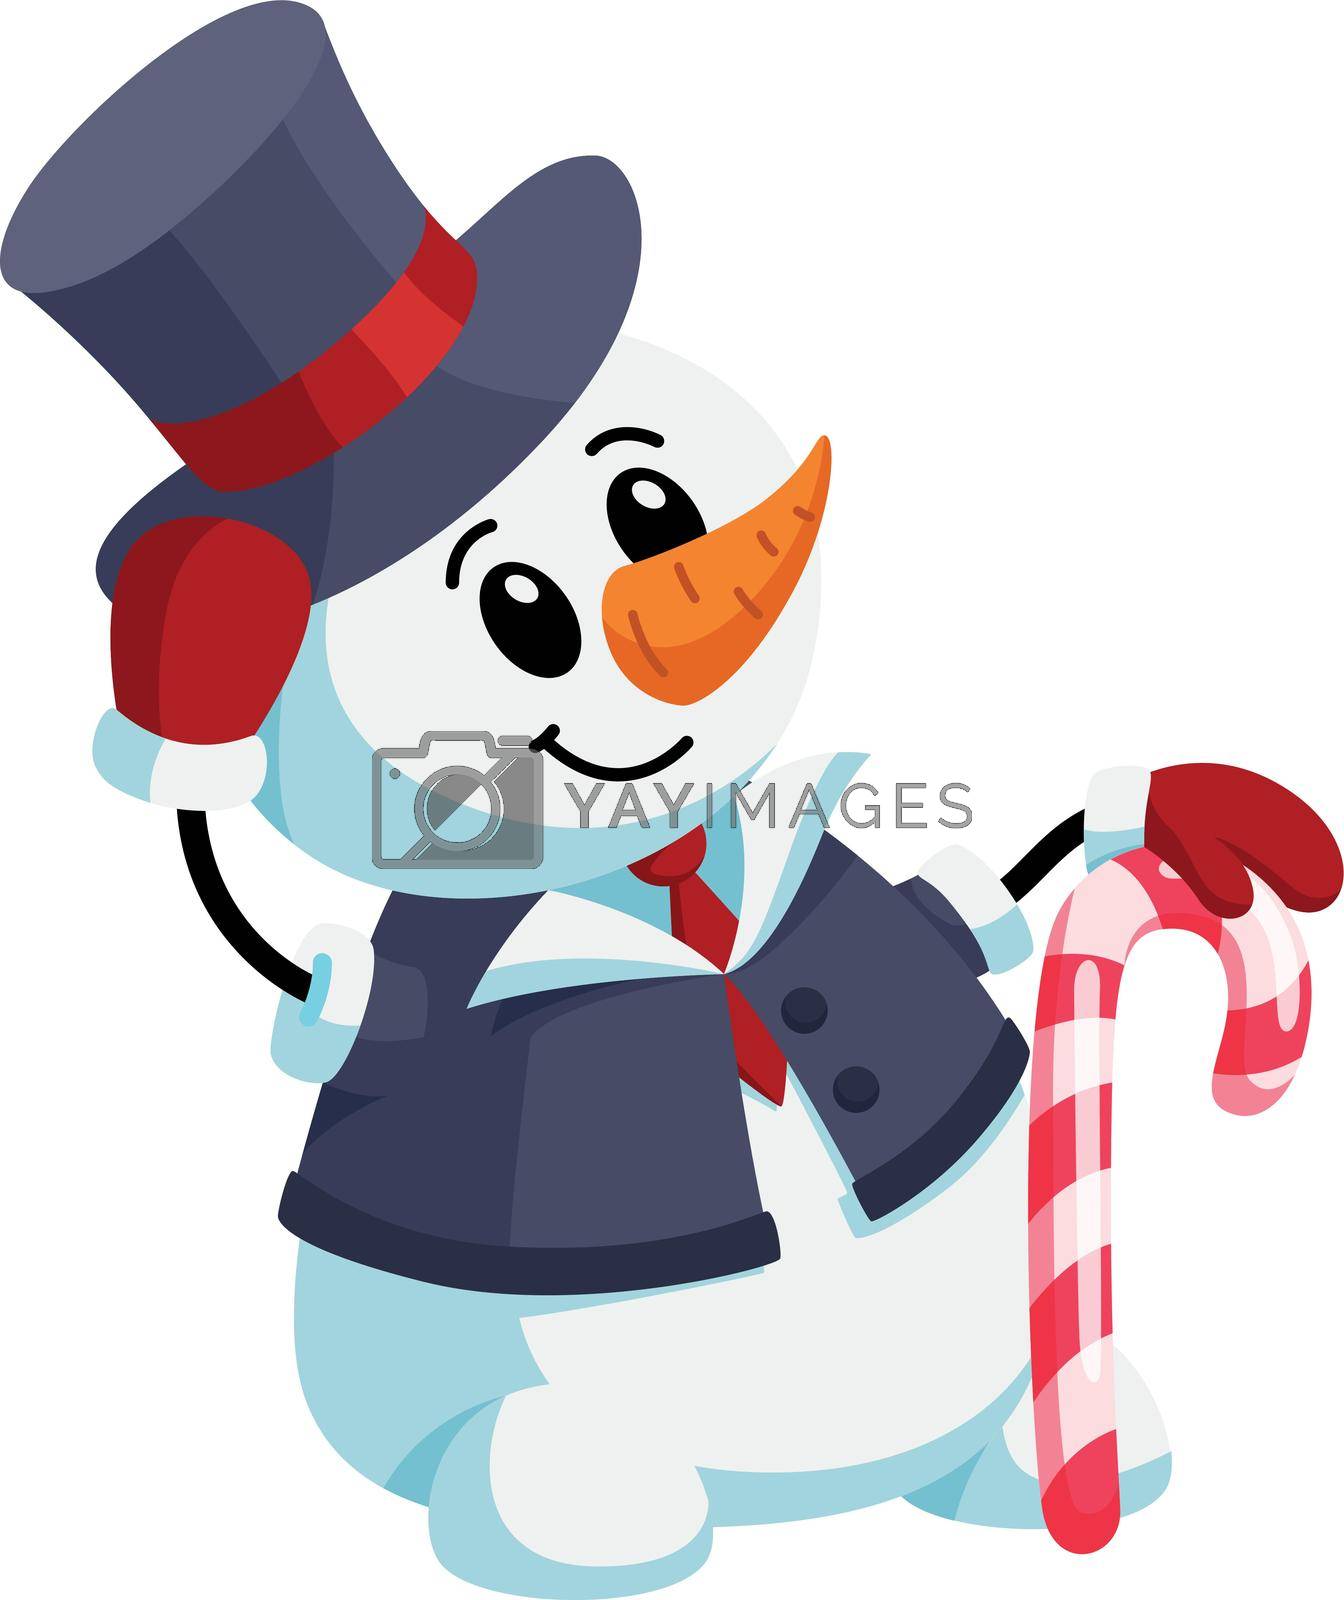 Royalty free image of Snowman in gentleman costume with sugar cane. Cartoon character by LadadikArt